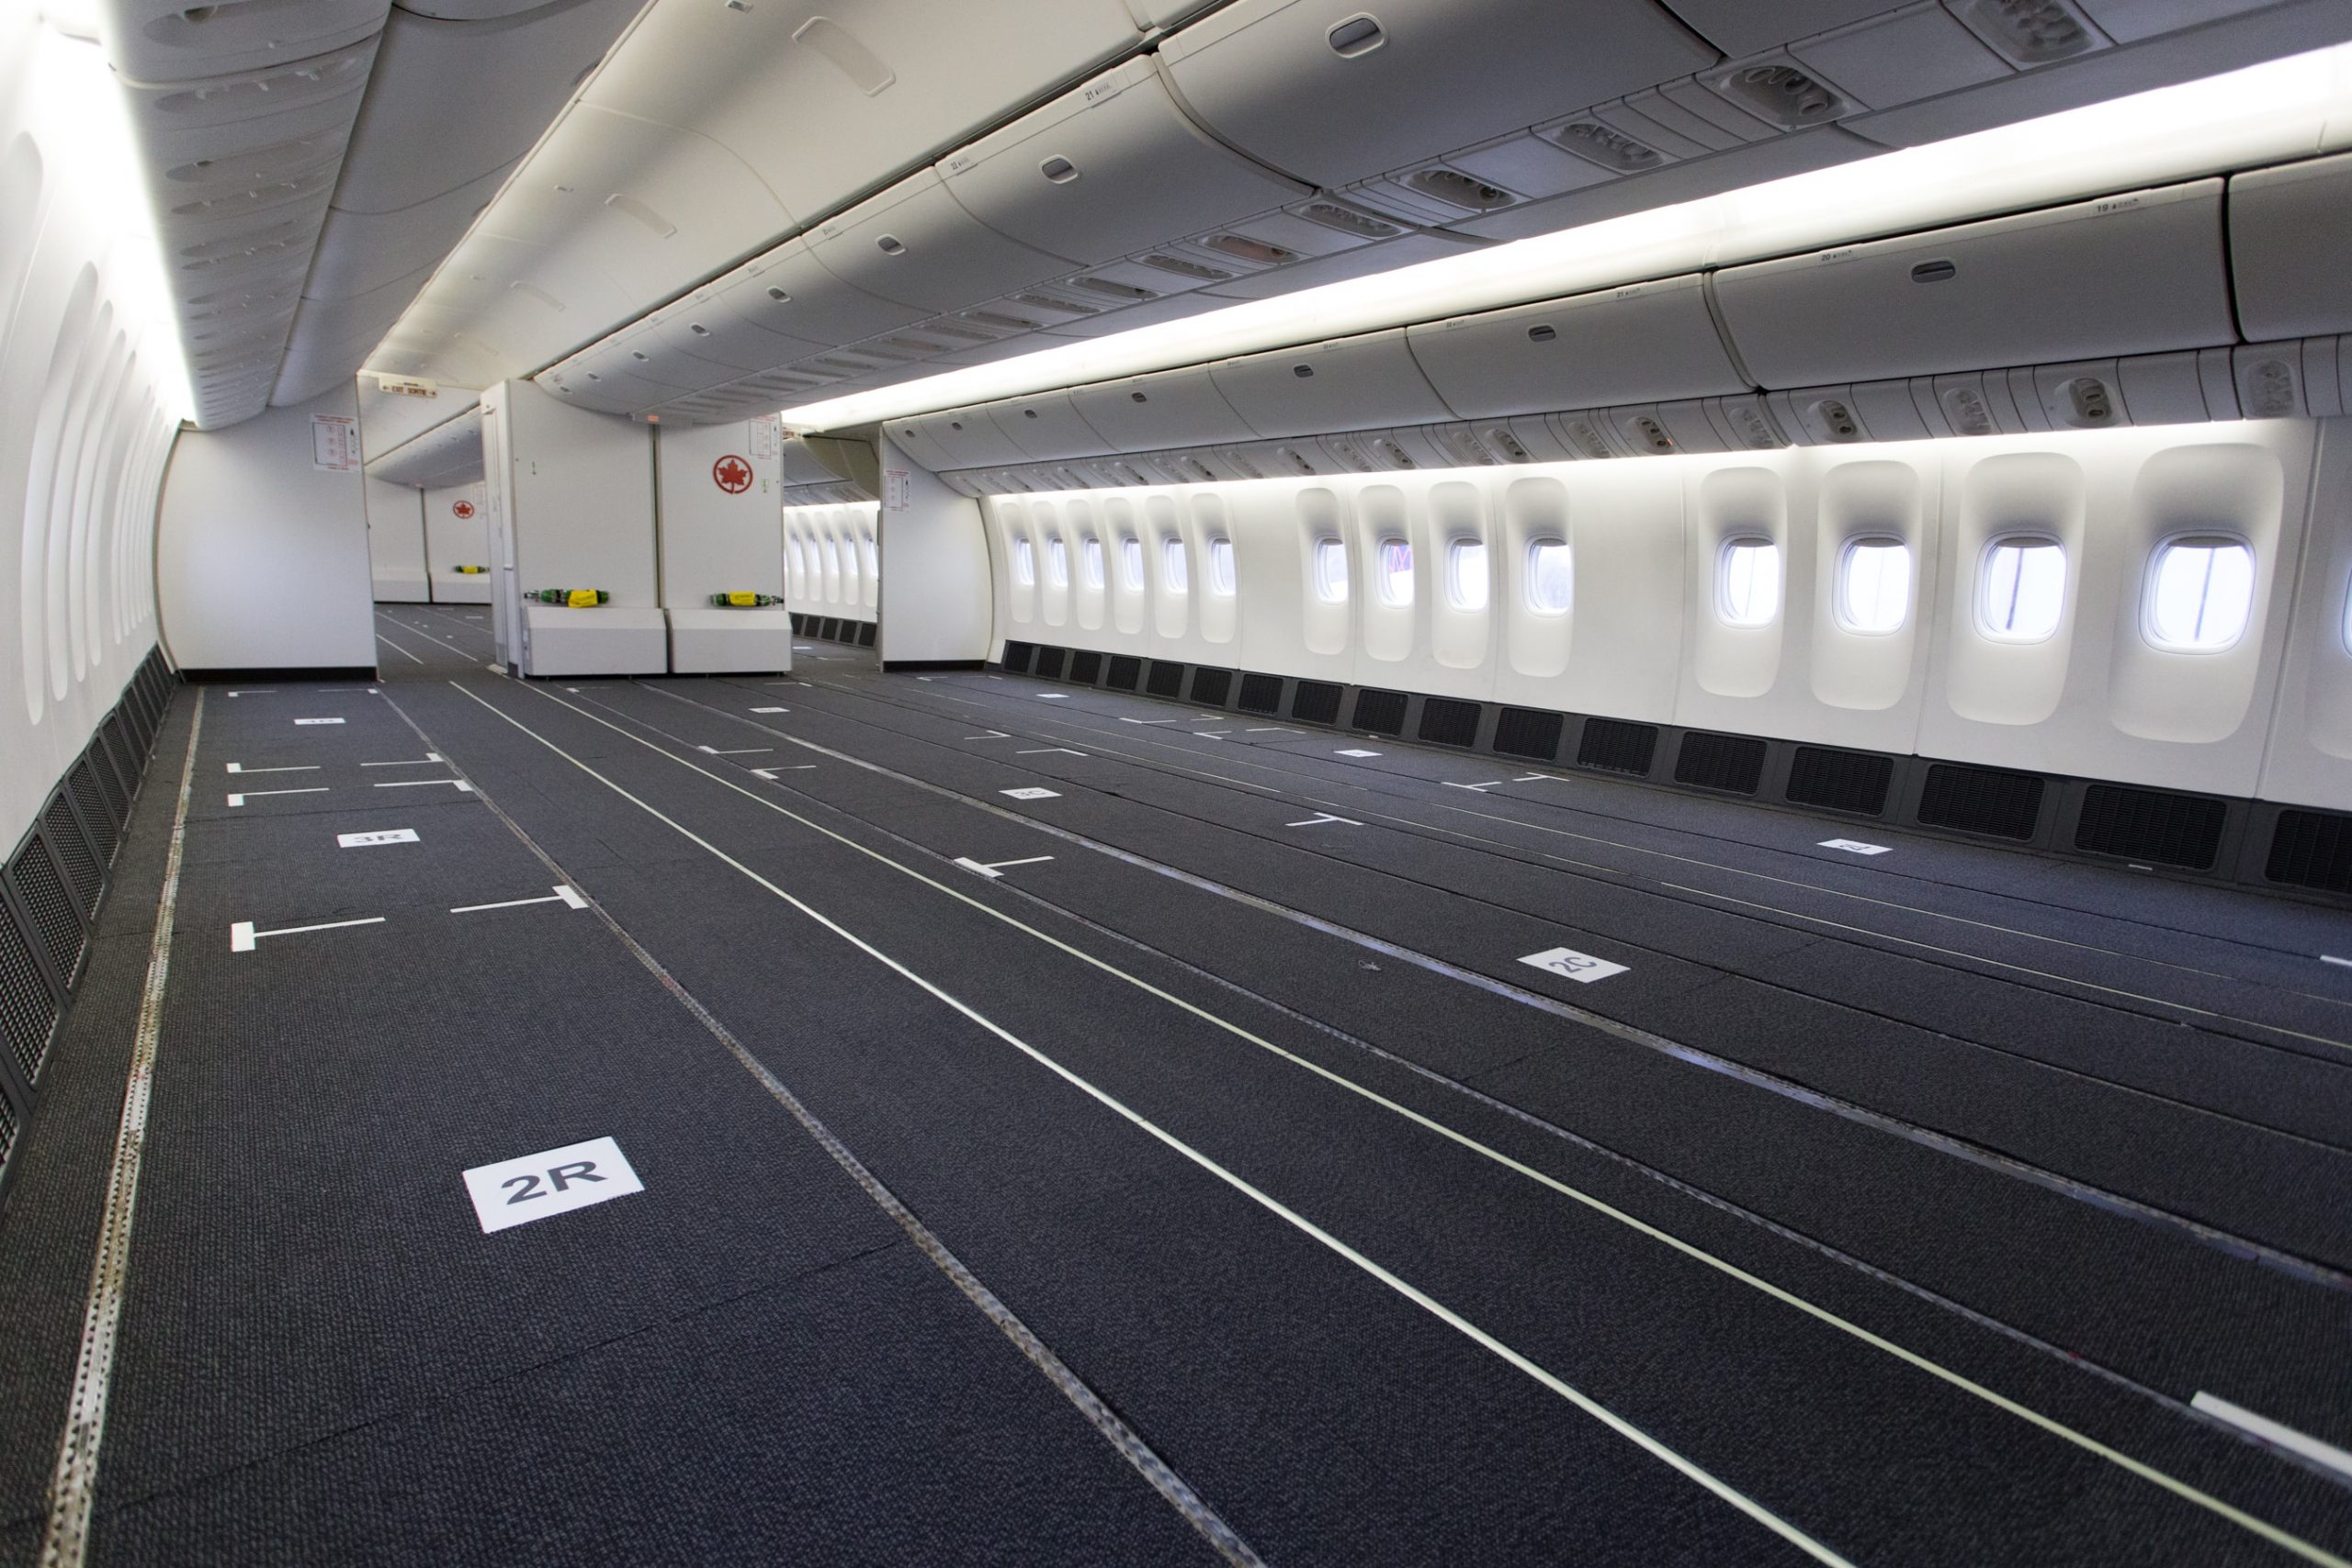 Air Canada reconfigures B777 pax aircraft cabins for freight